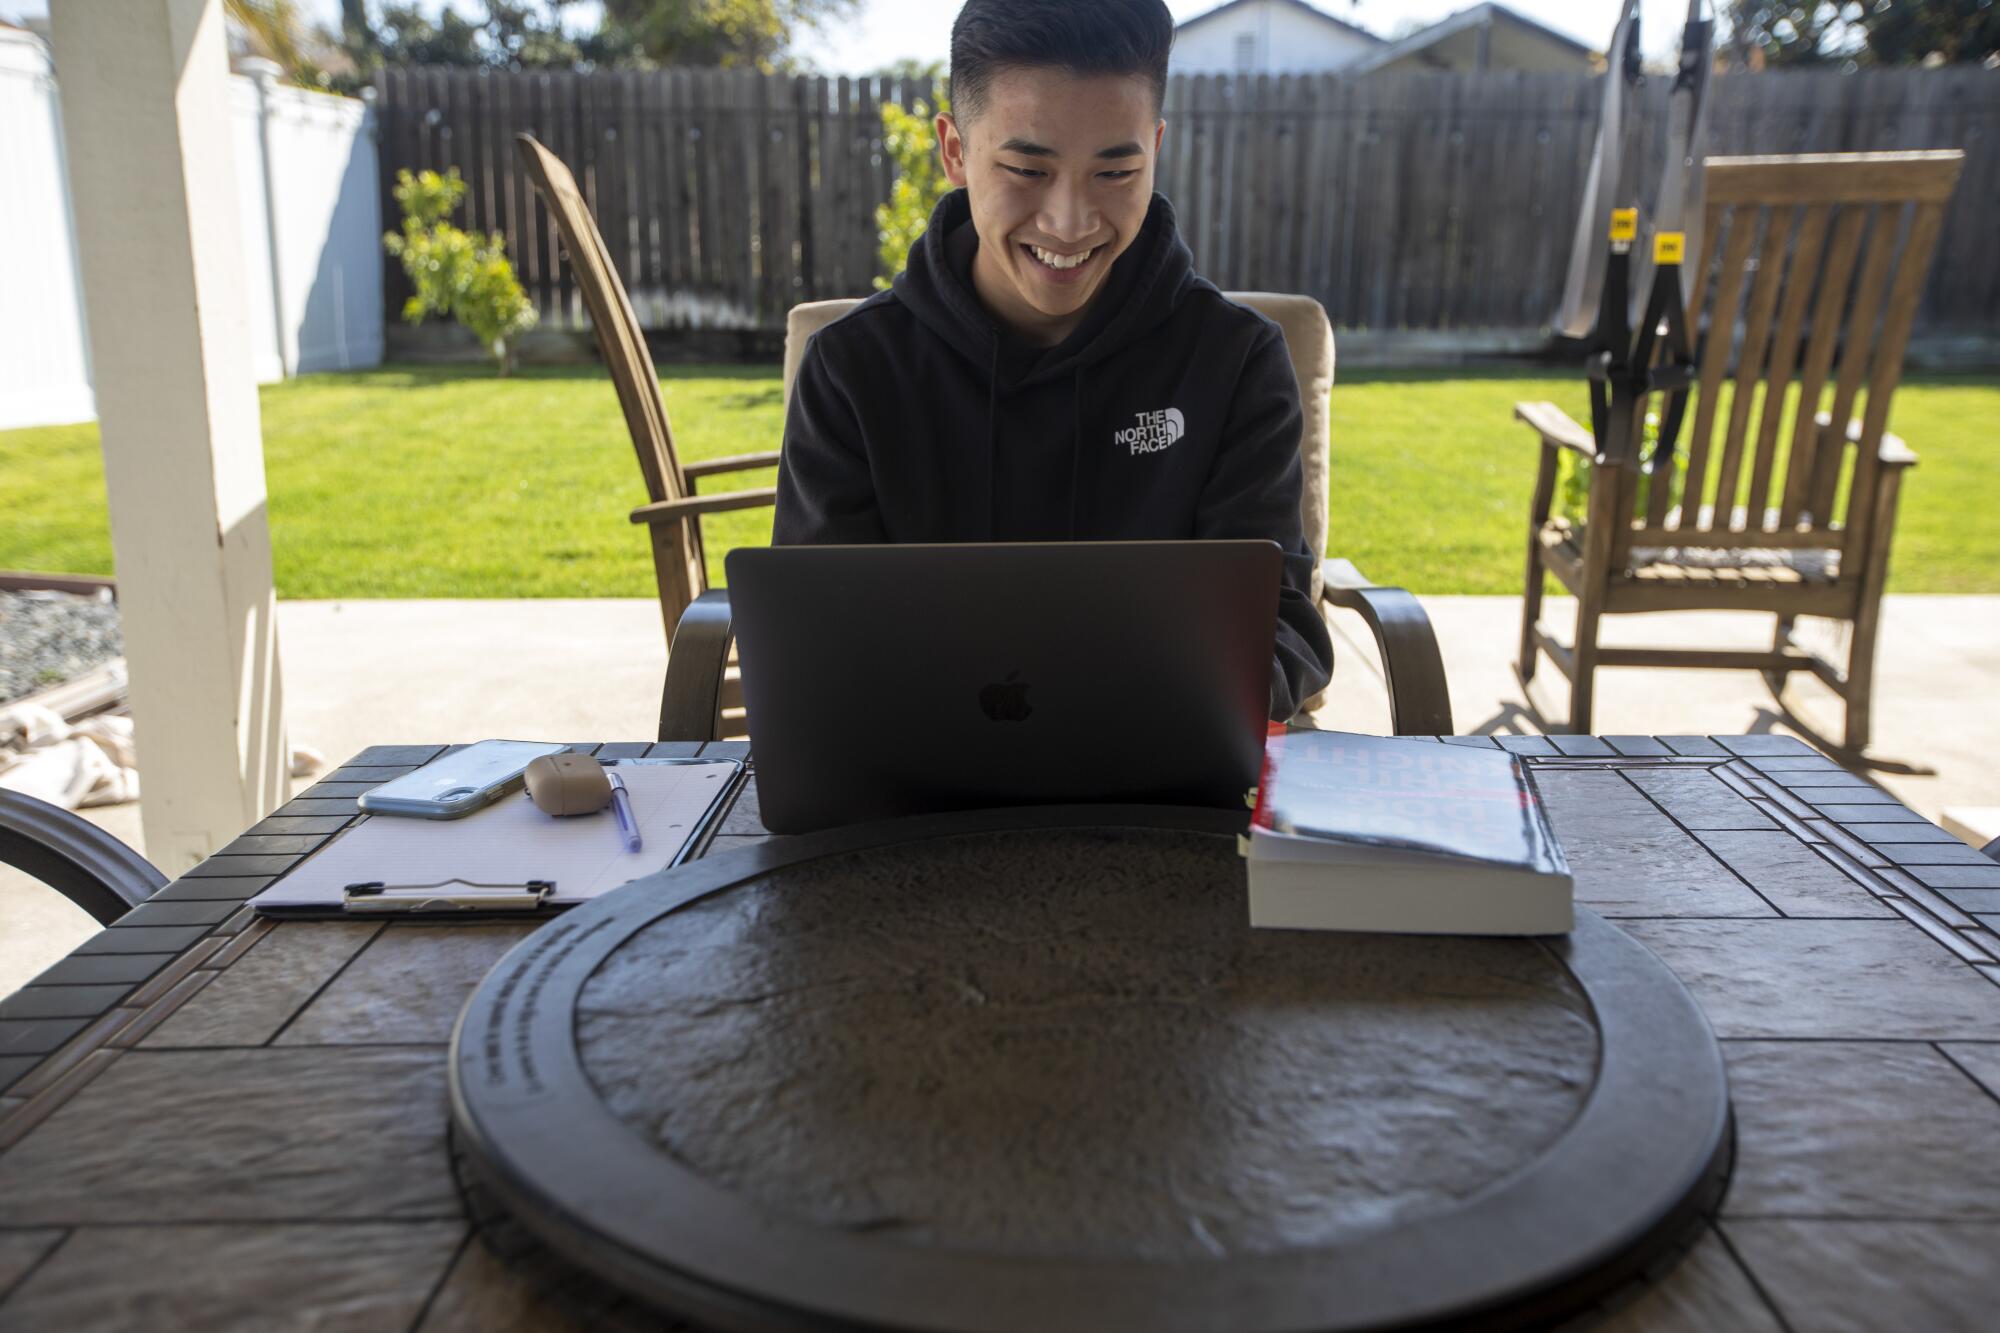 Ryan Fung smiles at his laptop as he sits on a patio